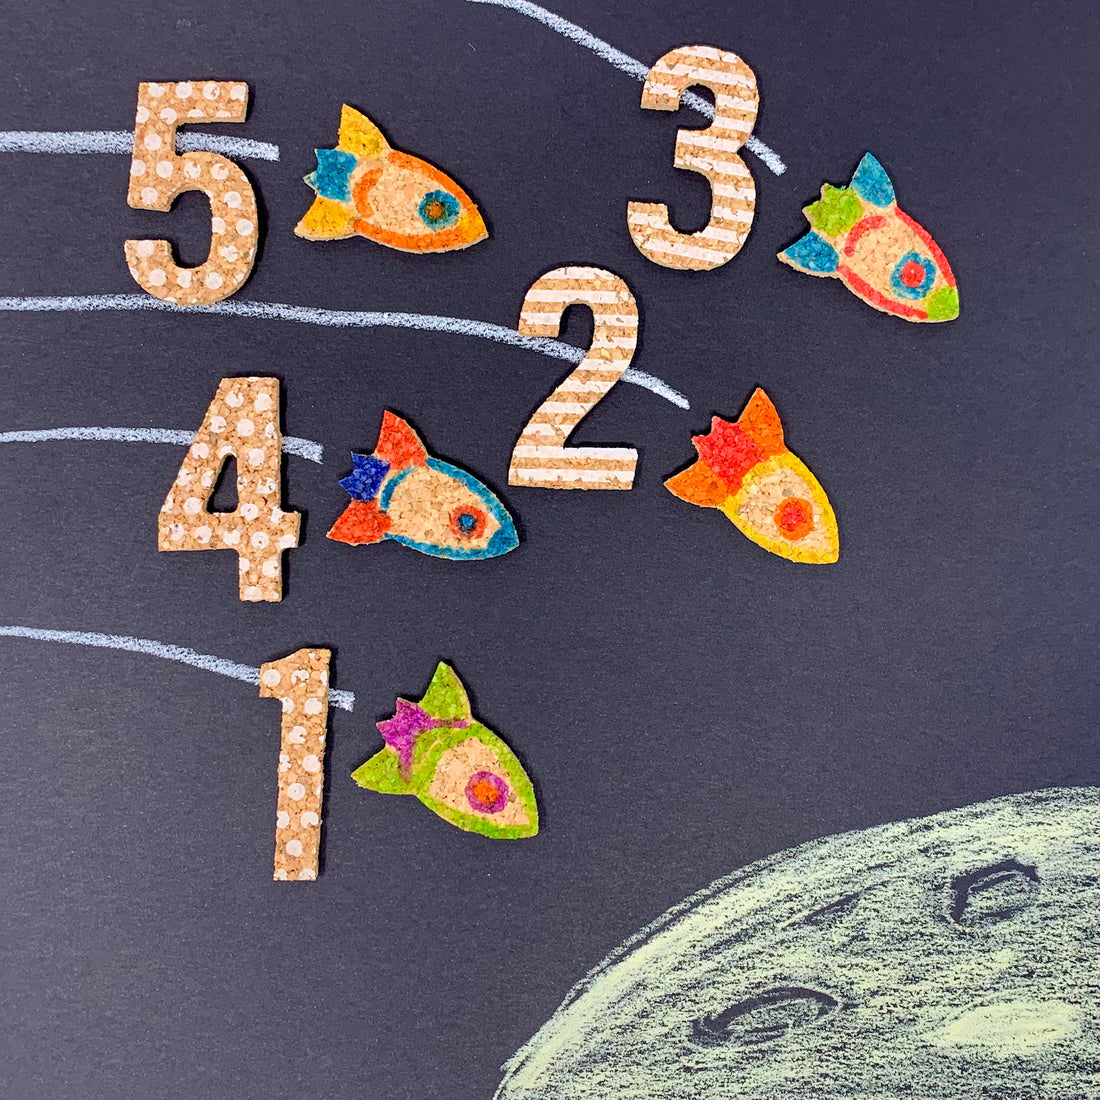 Counting with cork shapes - reach the moon with rockets - learn through play - PEpMelon Adventure Craft Kit